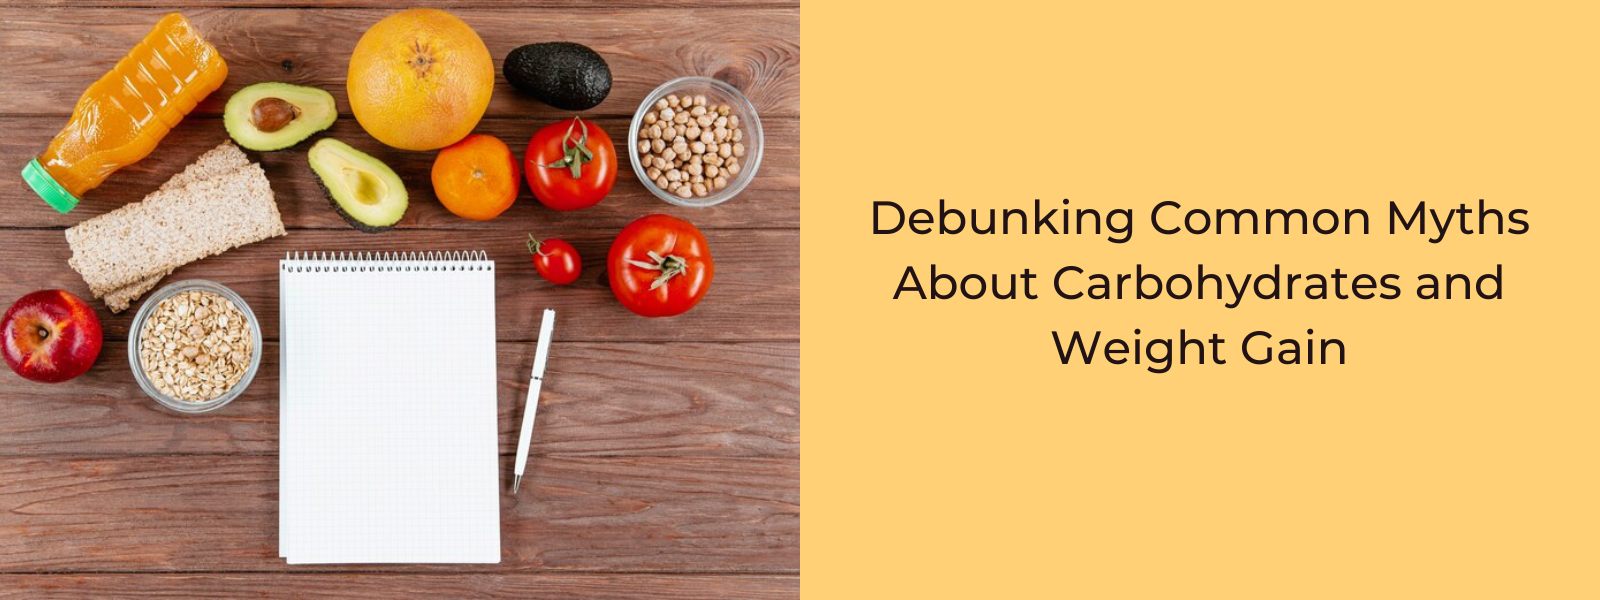 Debunking Common Myths About Carbohydrates and Weight Gain